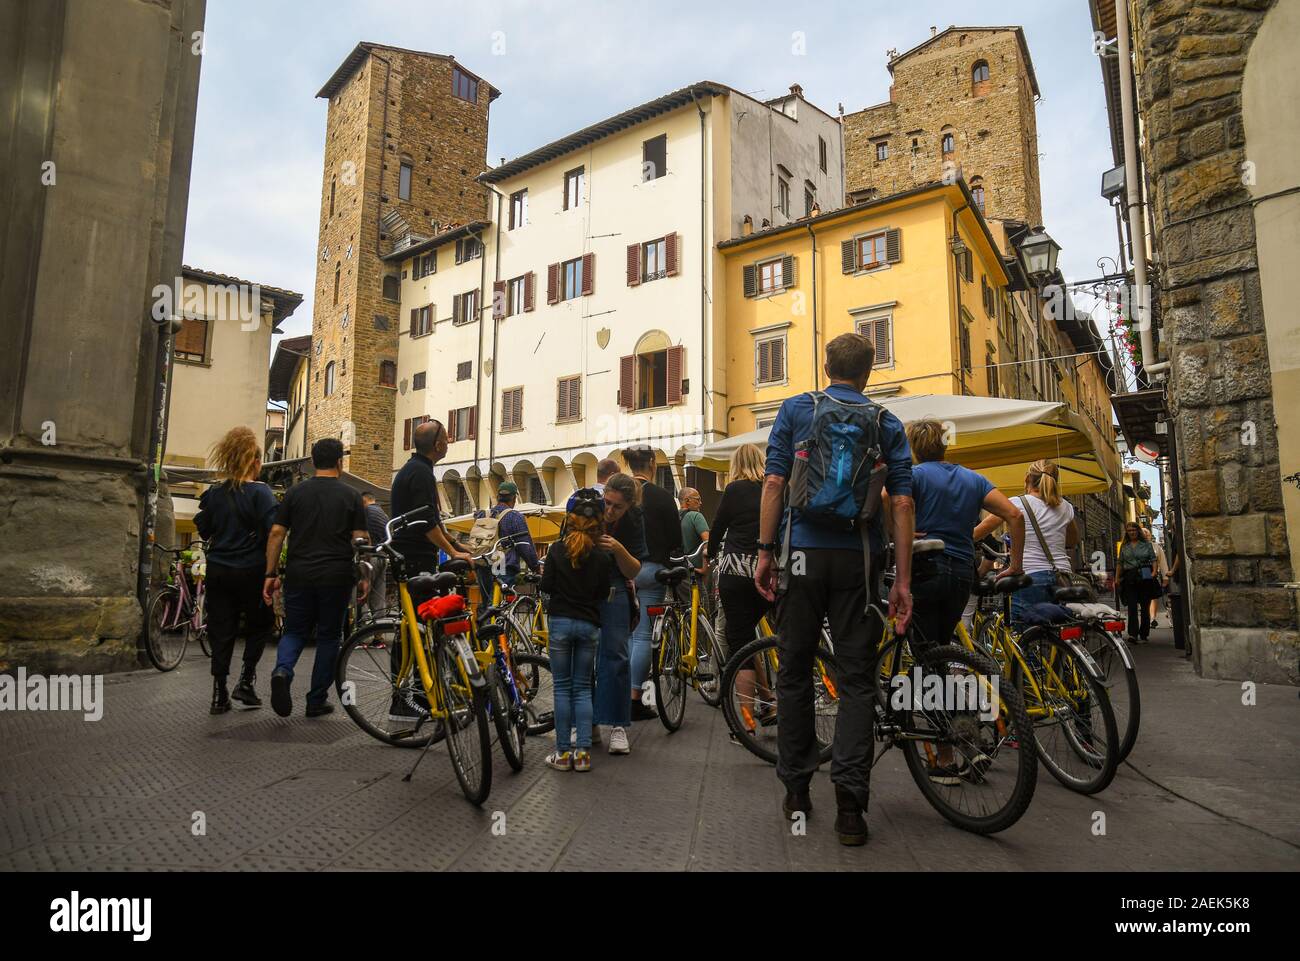 Group of tourists on bicycles in San Pier Maggiore square with the Corso Donati Towers in the centre of Florence, Unesco W.H. Site, Tuscany, Italy Stock Photo